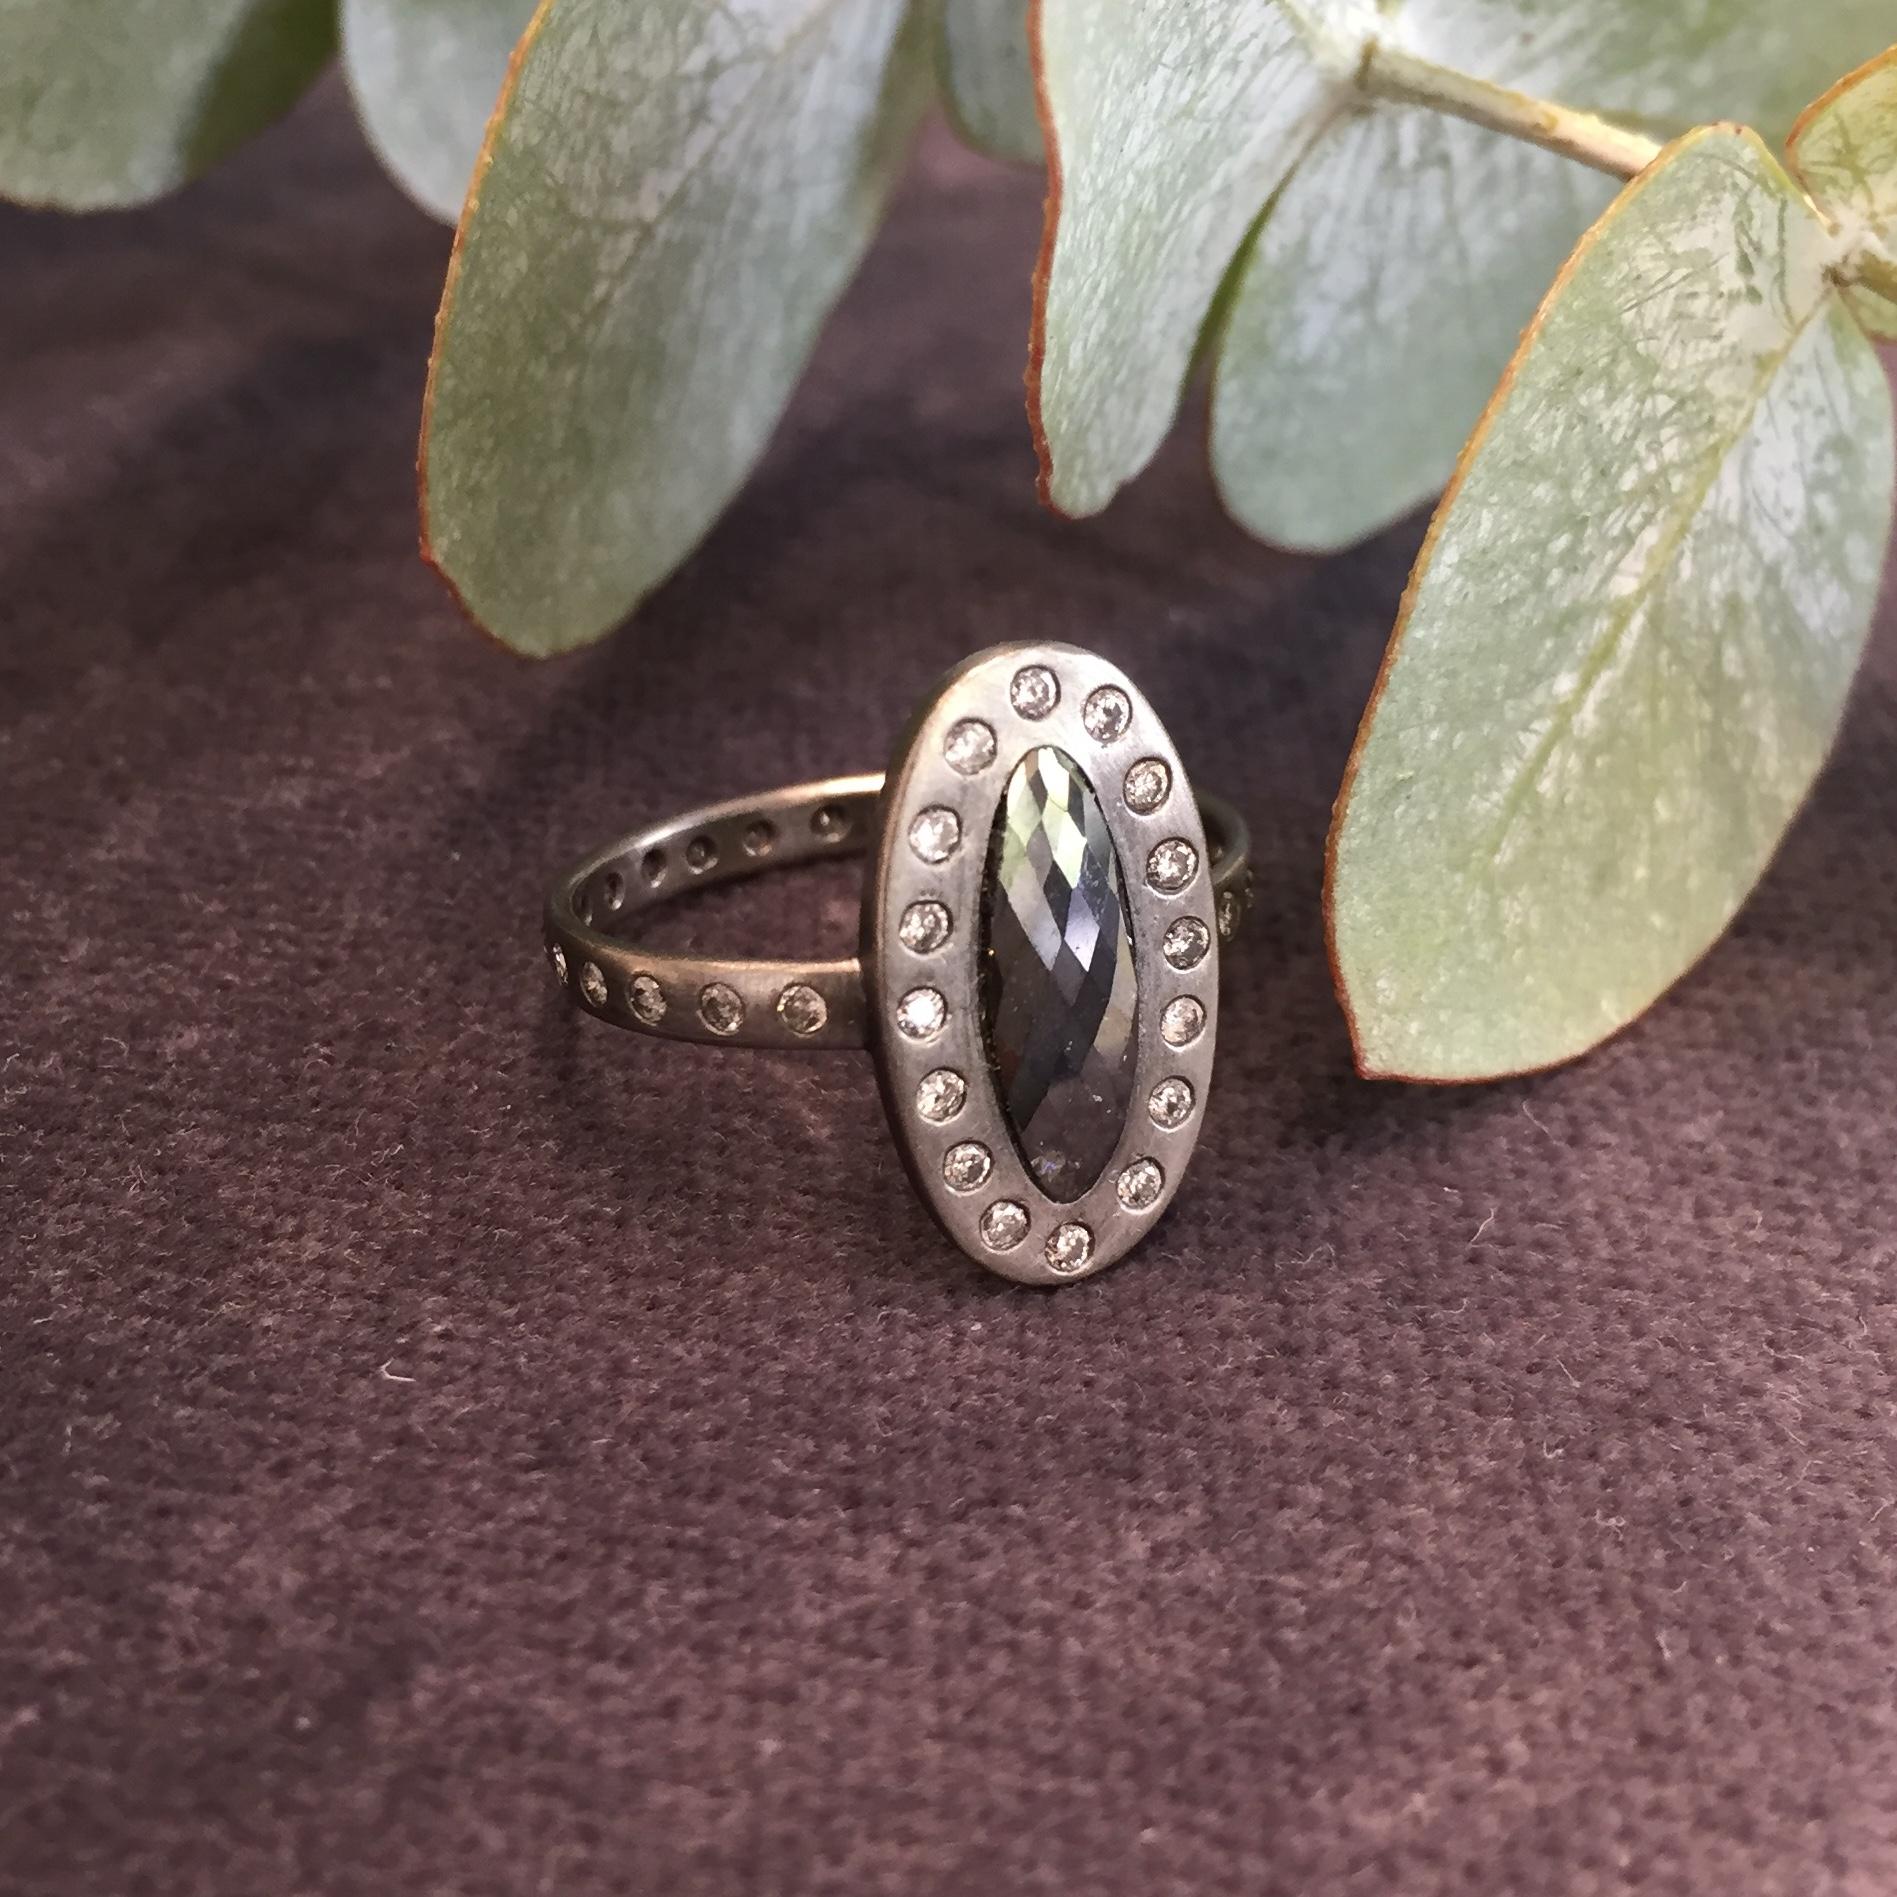 This 18ct white gold and black diamond ring is a one-off piece made by hand in our London workshop. The faceted black oval shaped diamond is 1.15carats (approximately 11.57mm x 4.10mm) and sits in a surround of 16 brilliant cut salt and pepper